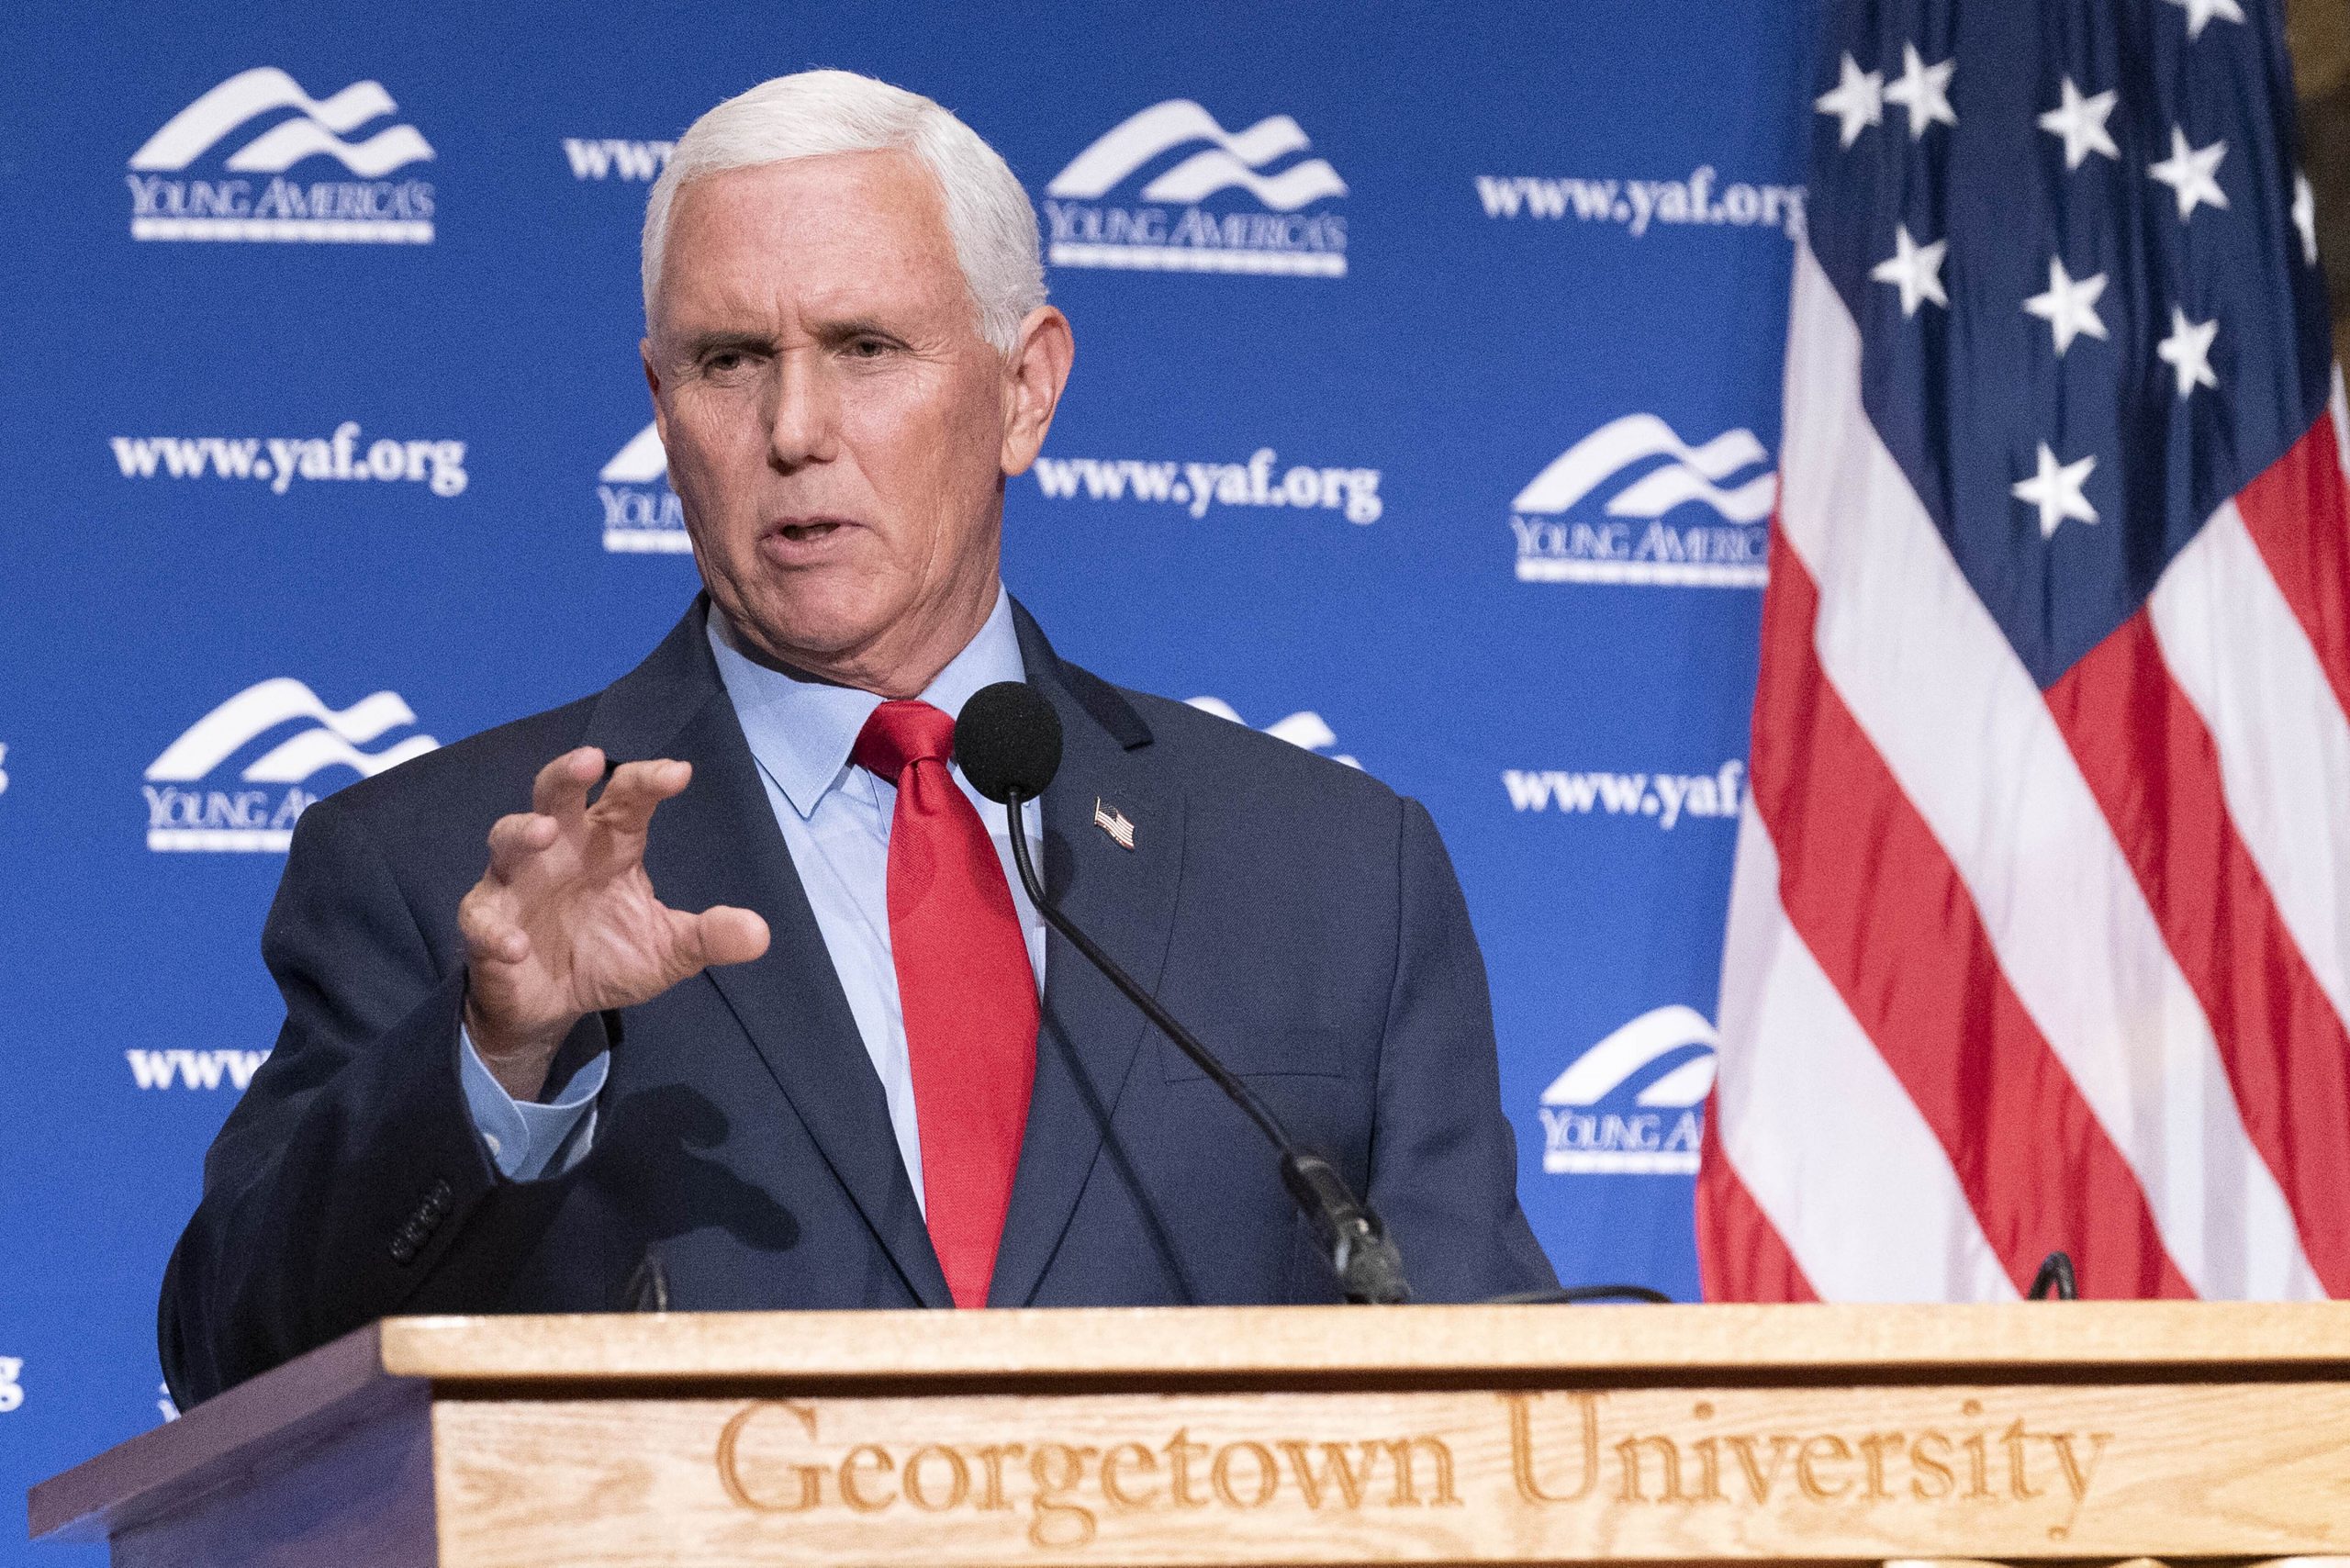 Mike Pence did not file to run for President, says spokesperson